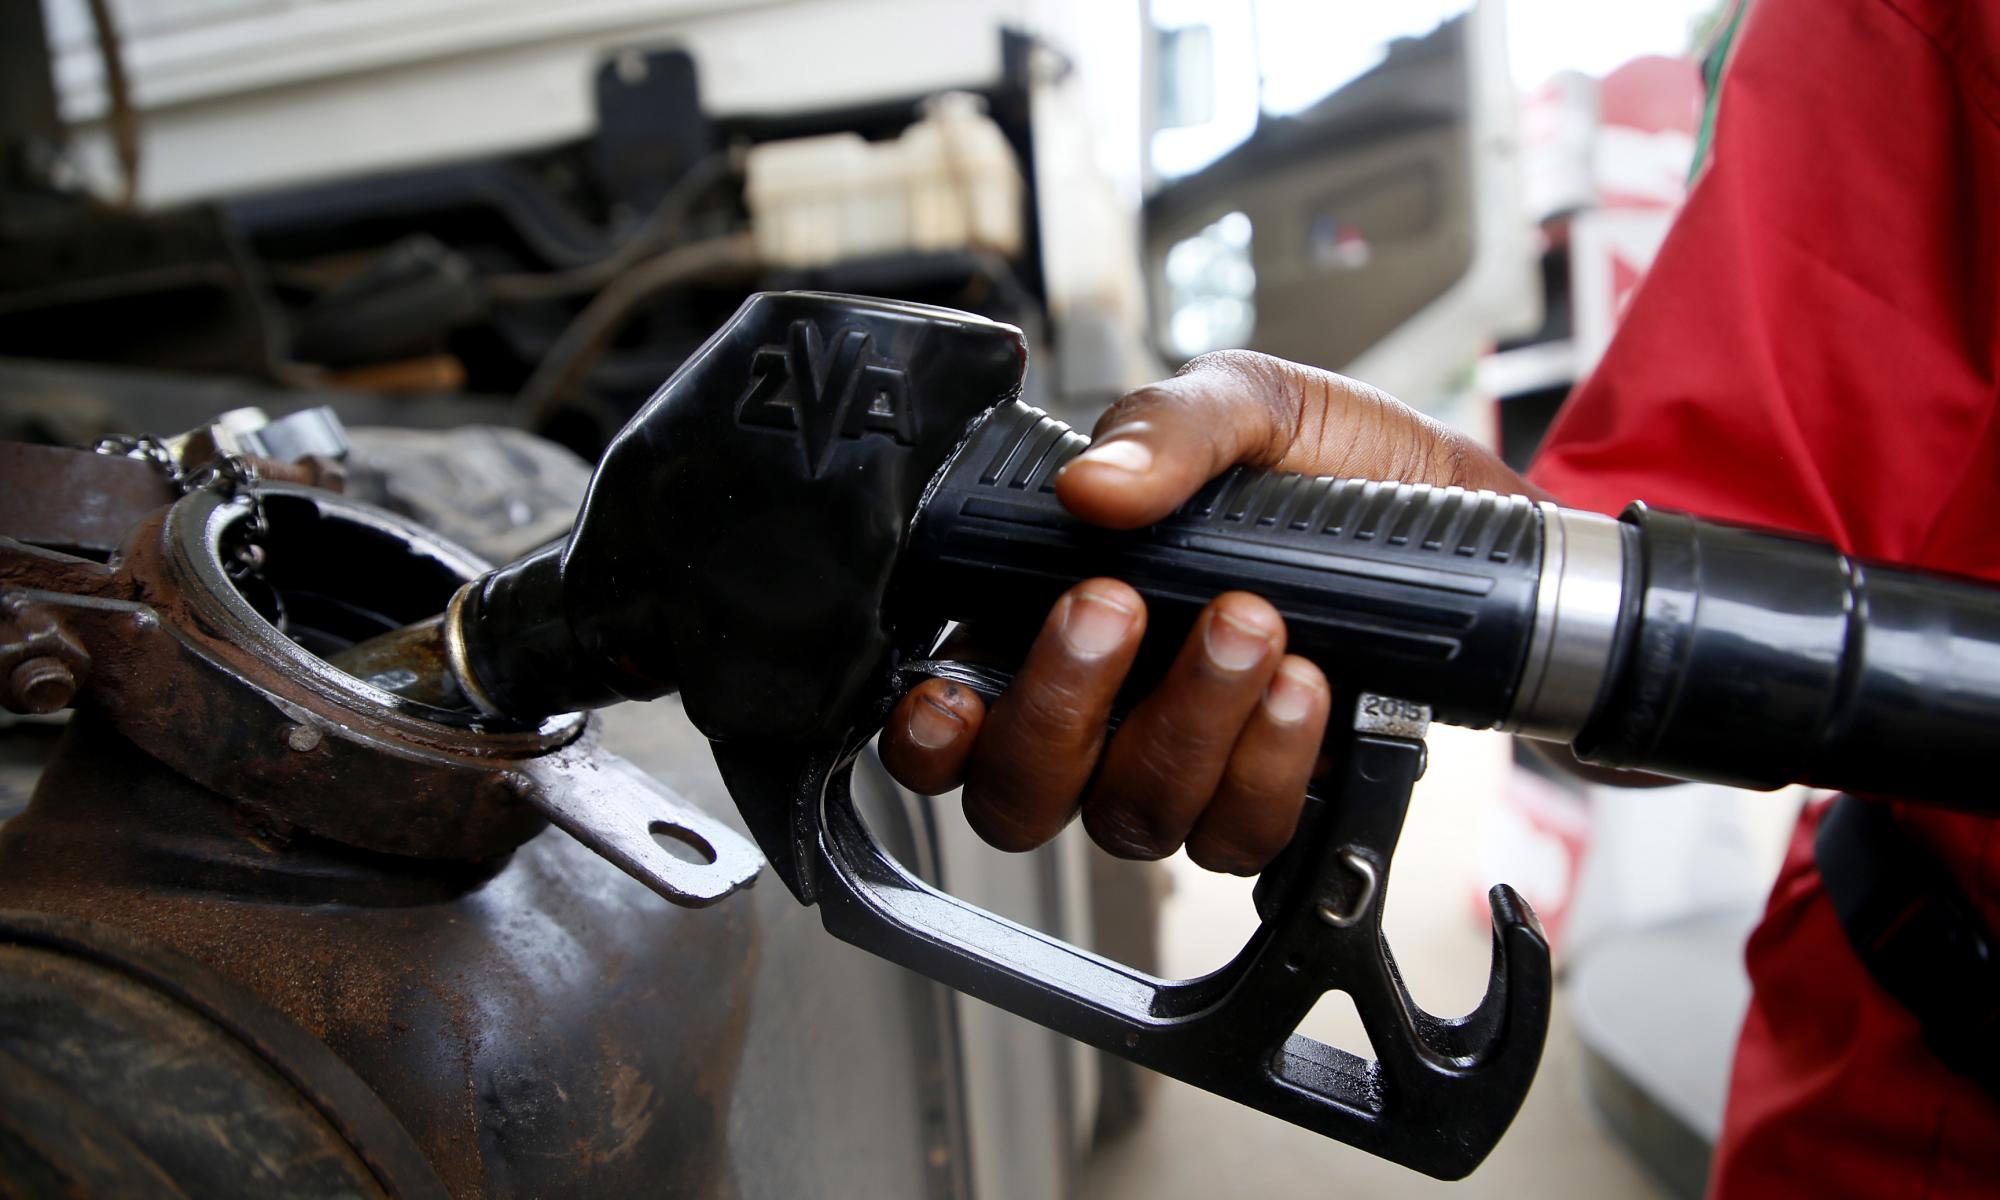 Increasing demand for oil and fuel threatens African nations’ economies, analysis finds